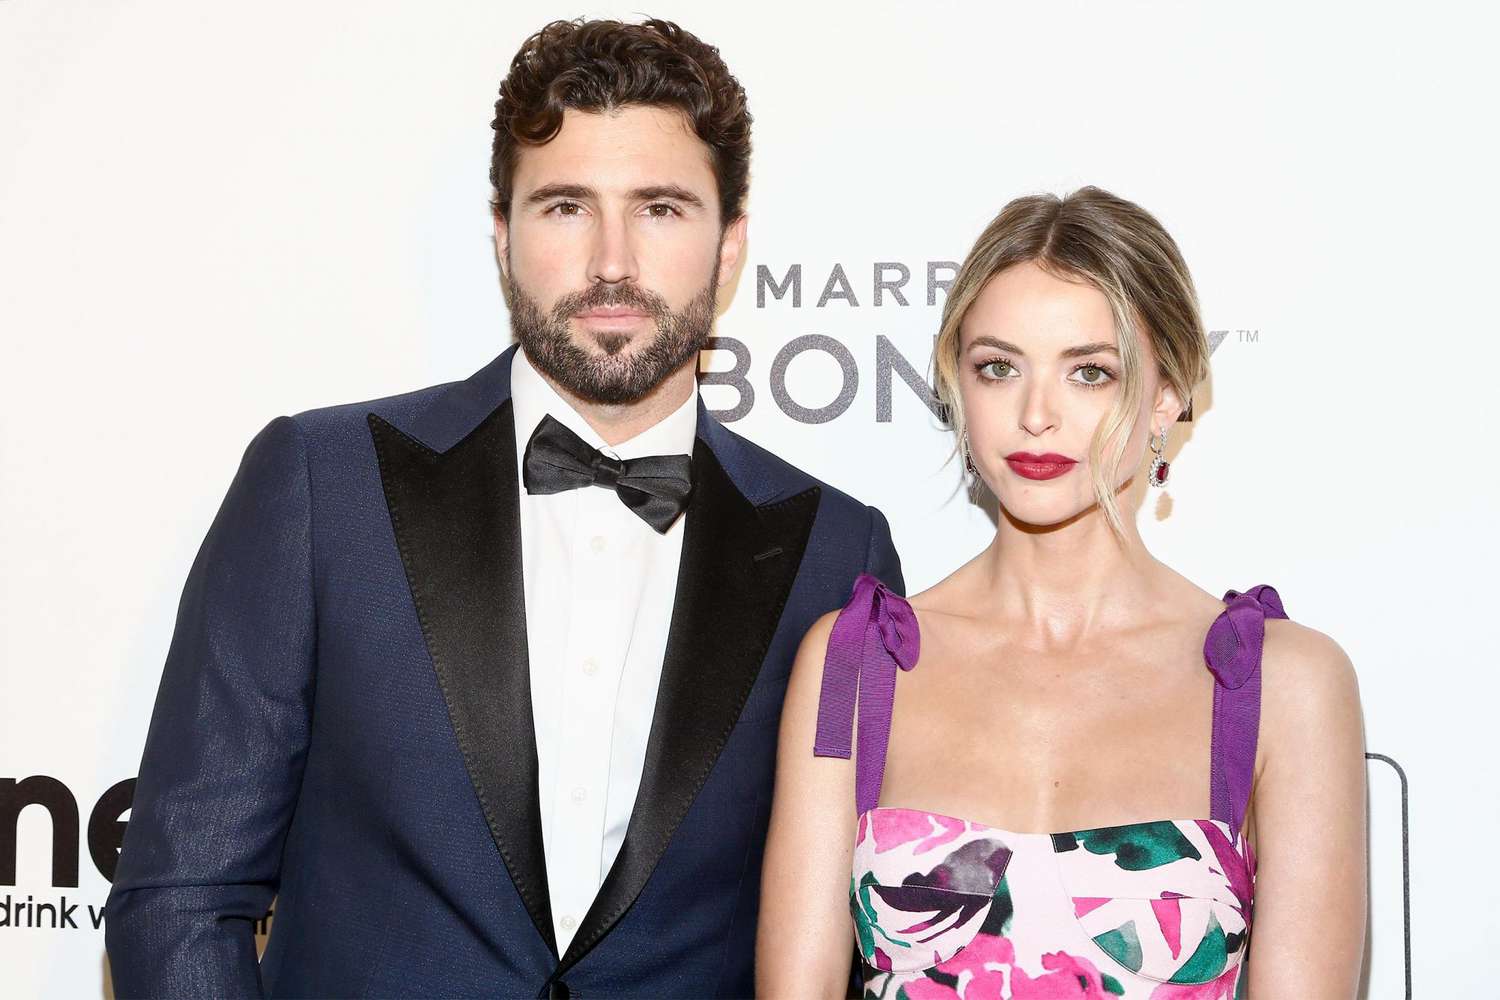 LOS ANGELES, CA - FEBRUARY 24: Brody Jenner and Kaitlynn Carter attend IMDb LIVE At The Elton John AIDS Foundation Academy Awards&reg; Viewing Party on February 24, 2019 in Los Angeles, California. (Photo by Tommaso Boddi/Getty Images for IMDb )